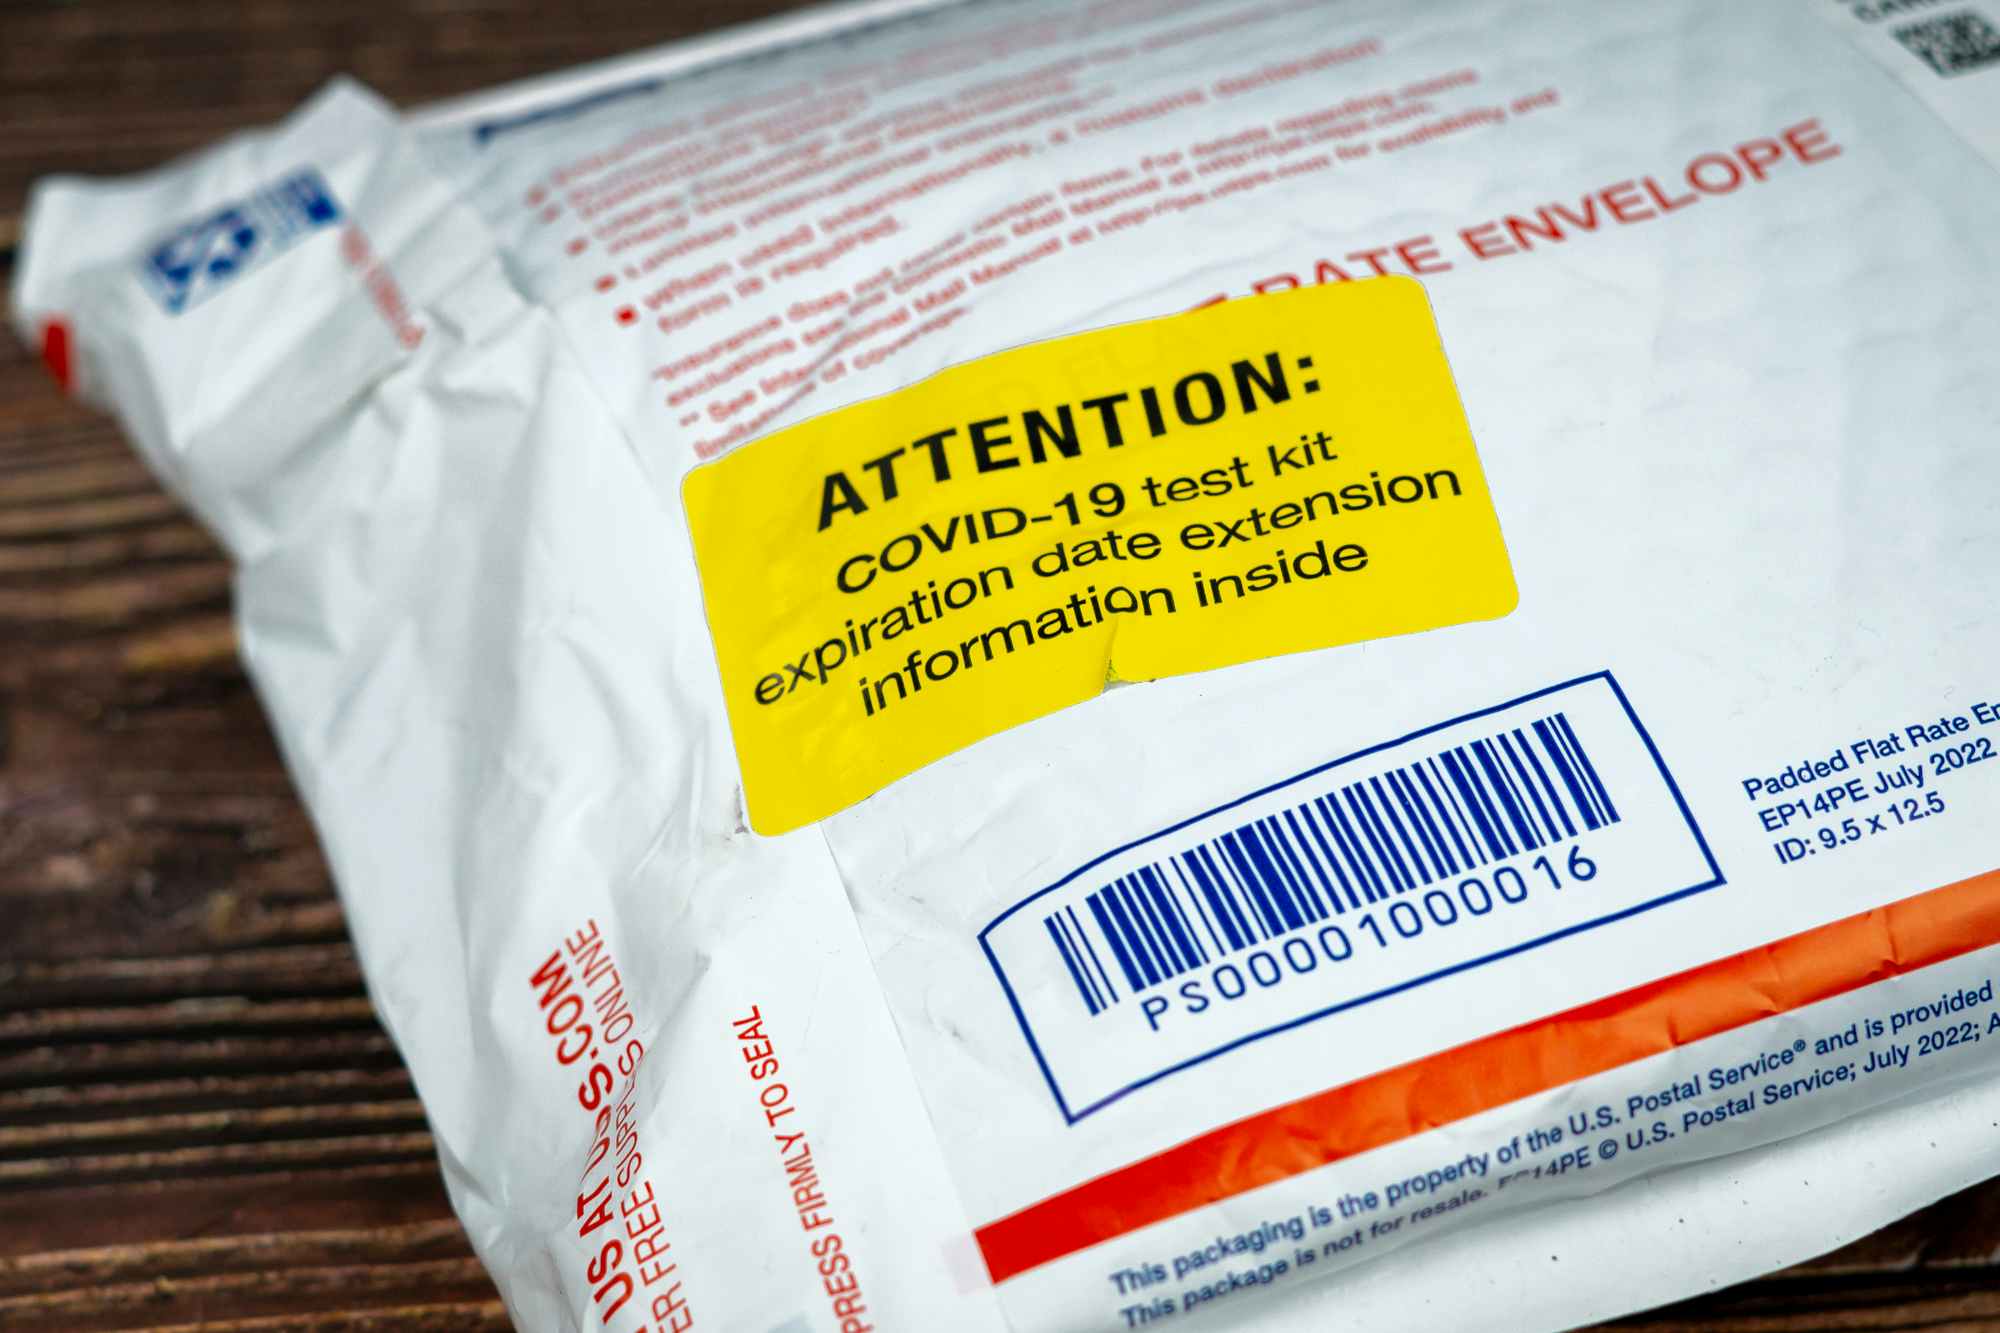 a close up on a sticker that says "Attention: COVID-19 test kit expiration date extension information inside